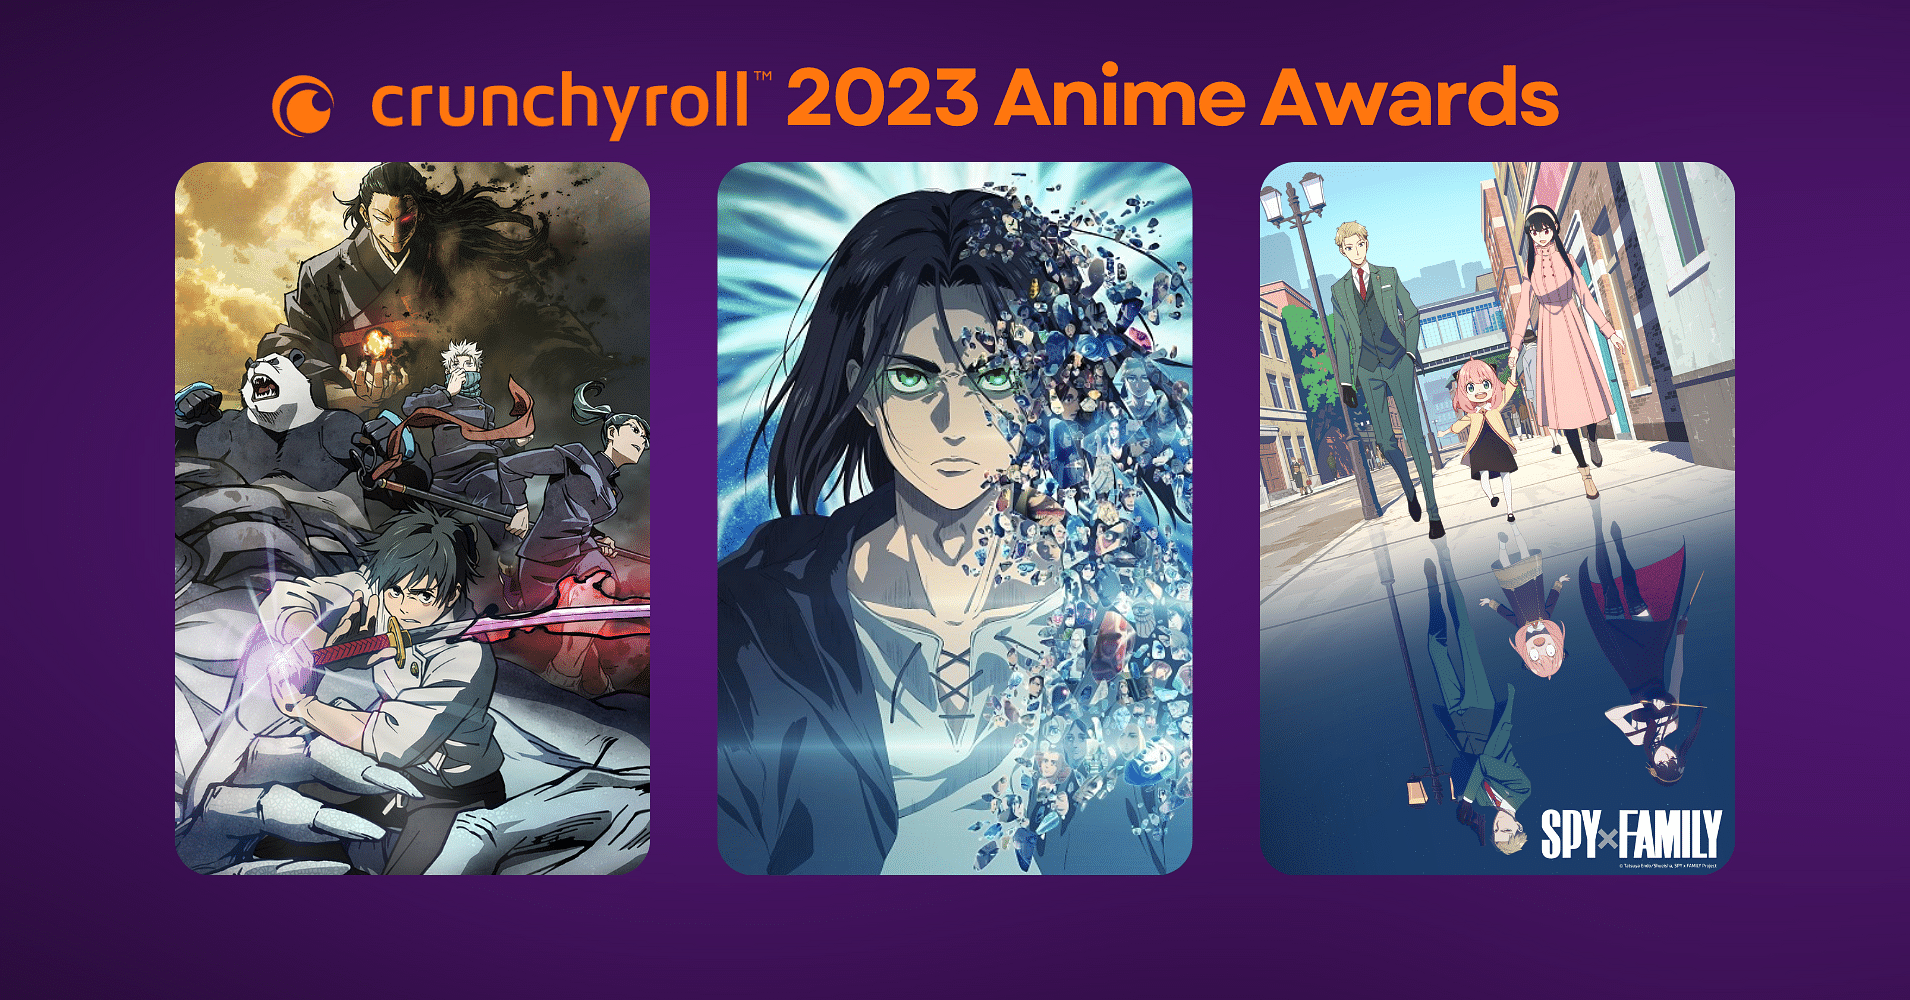 Cyberpunk Edgerunners takes the crown as Anime of the Year at 2023   Hindustan Times